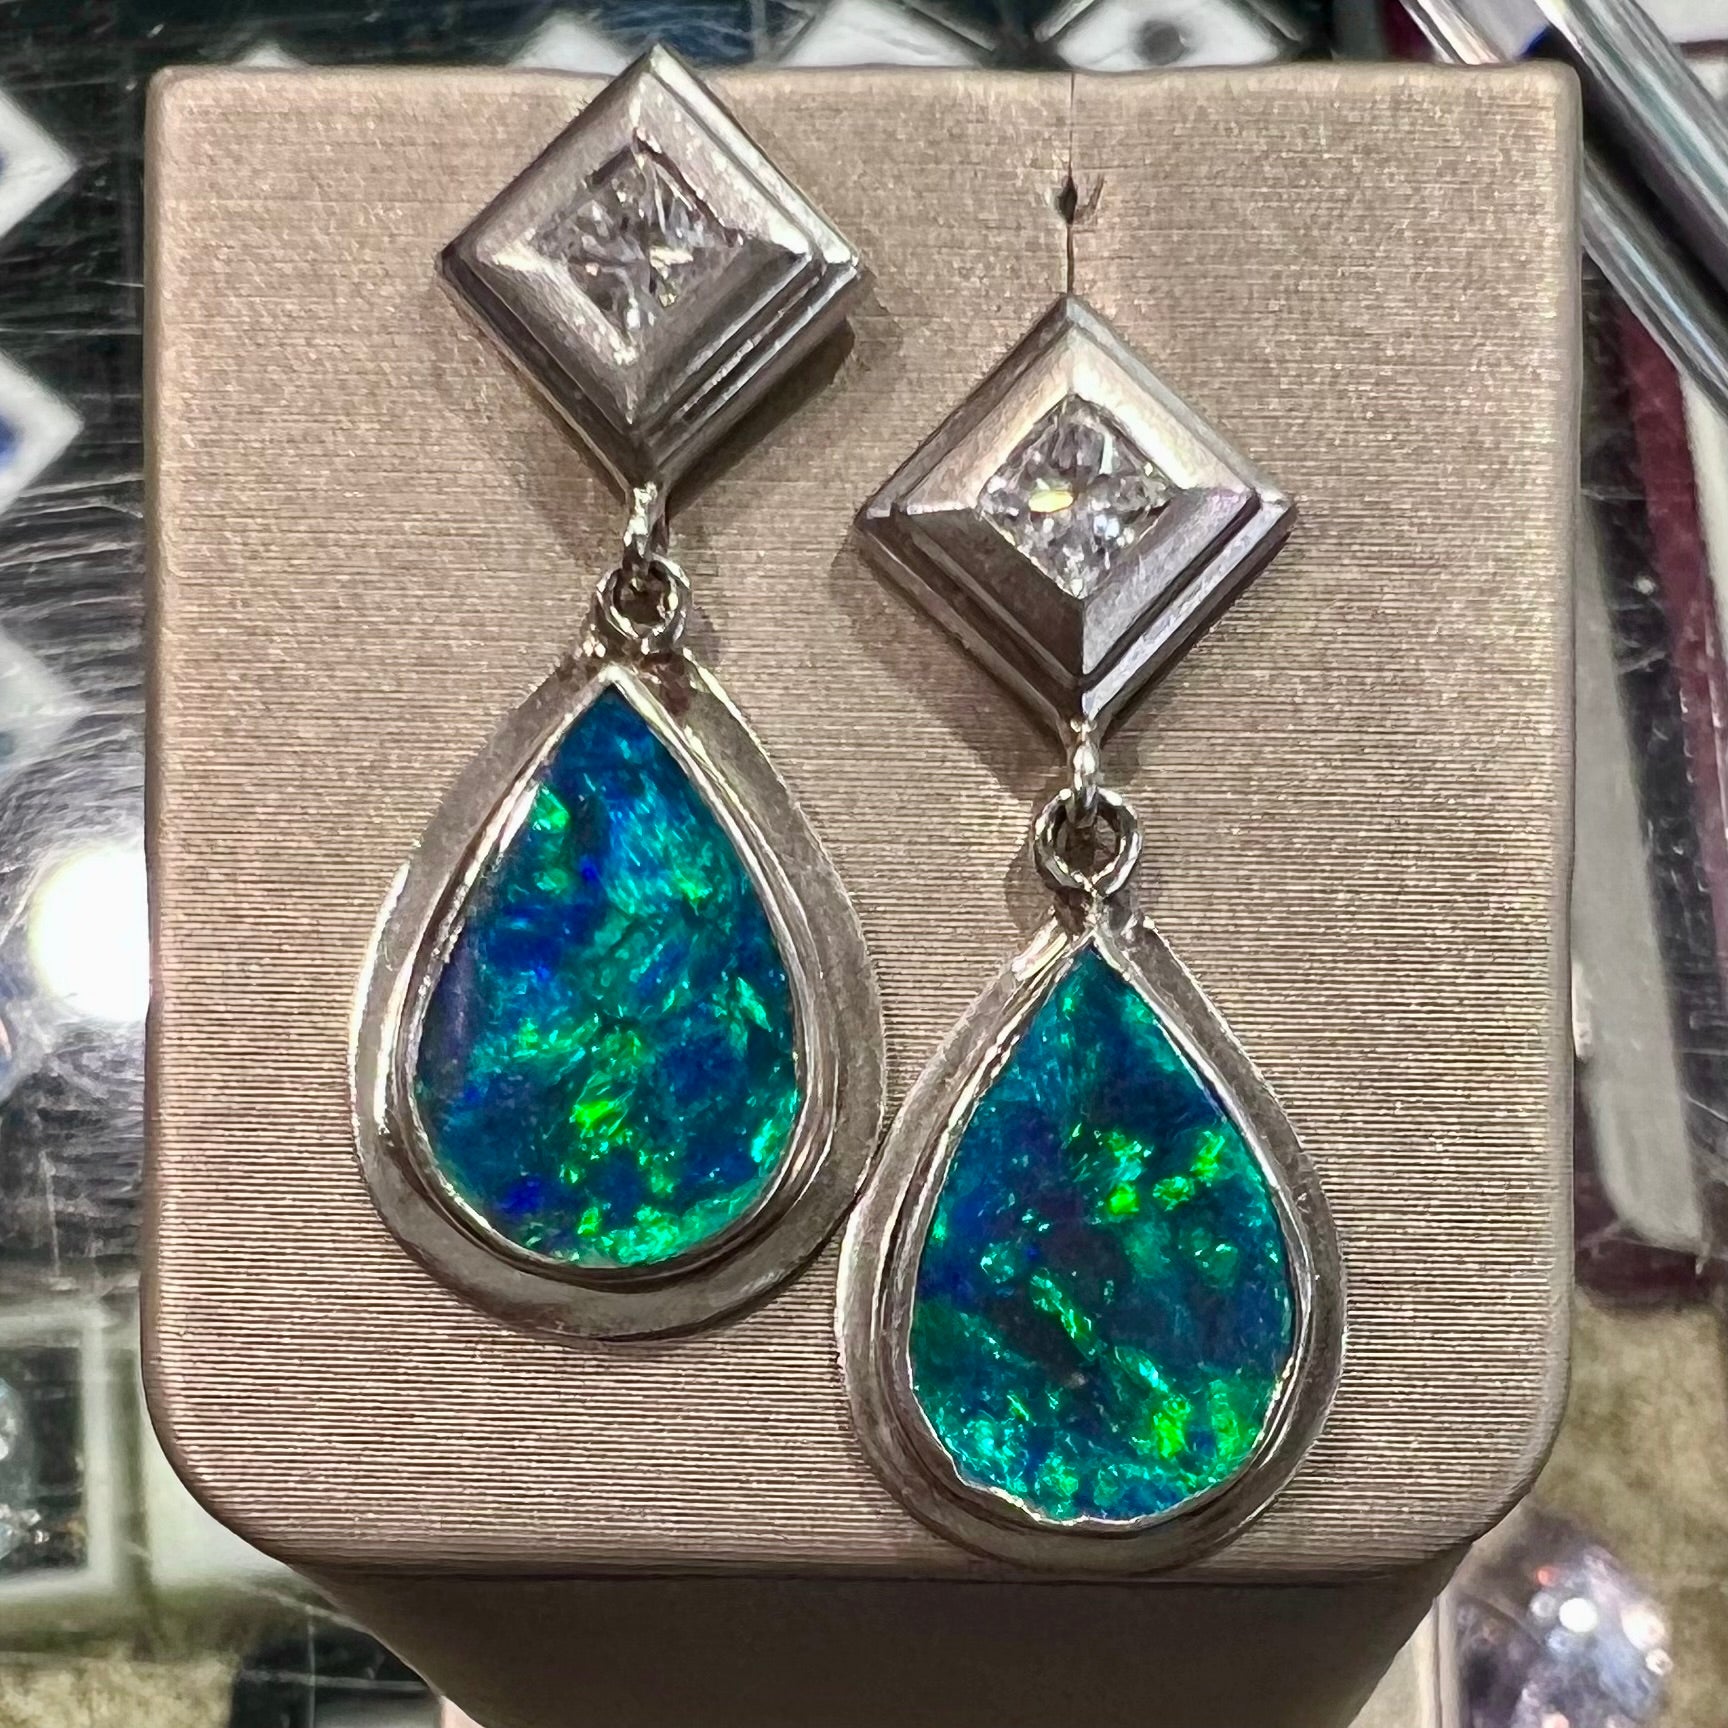 Black crystal opal dangle earrings with blue body color and green play of color set with princess cut diamonds in platinum.